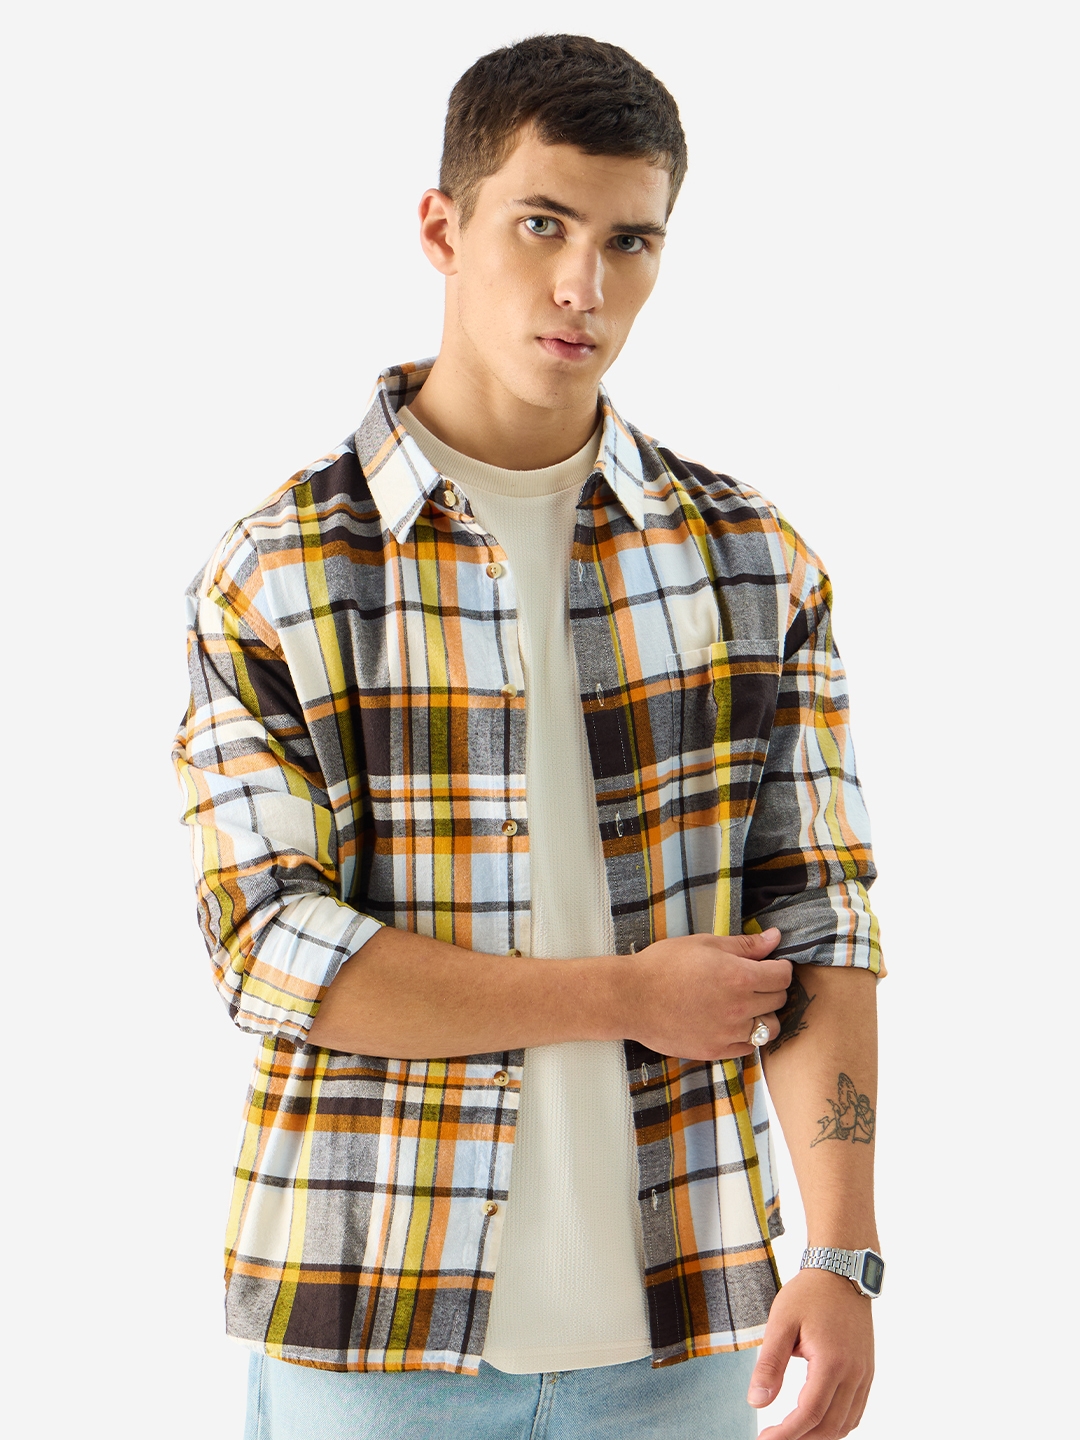 The Souled Store | Men's Misted Quartz Relaxed Casual Shirt